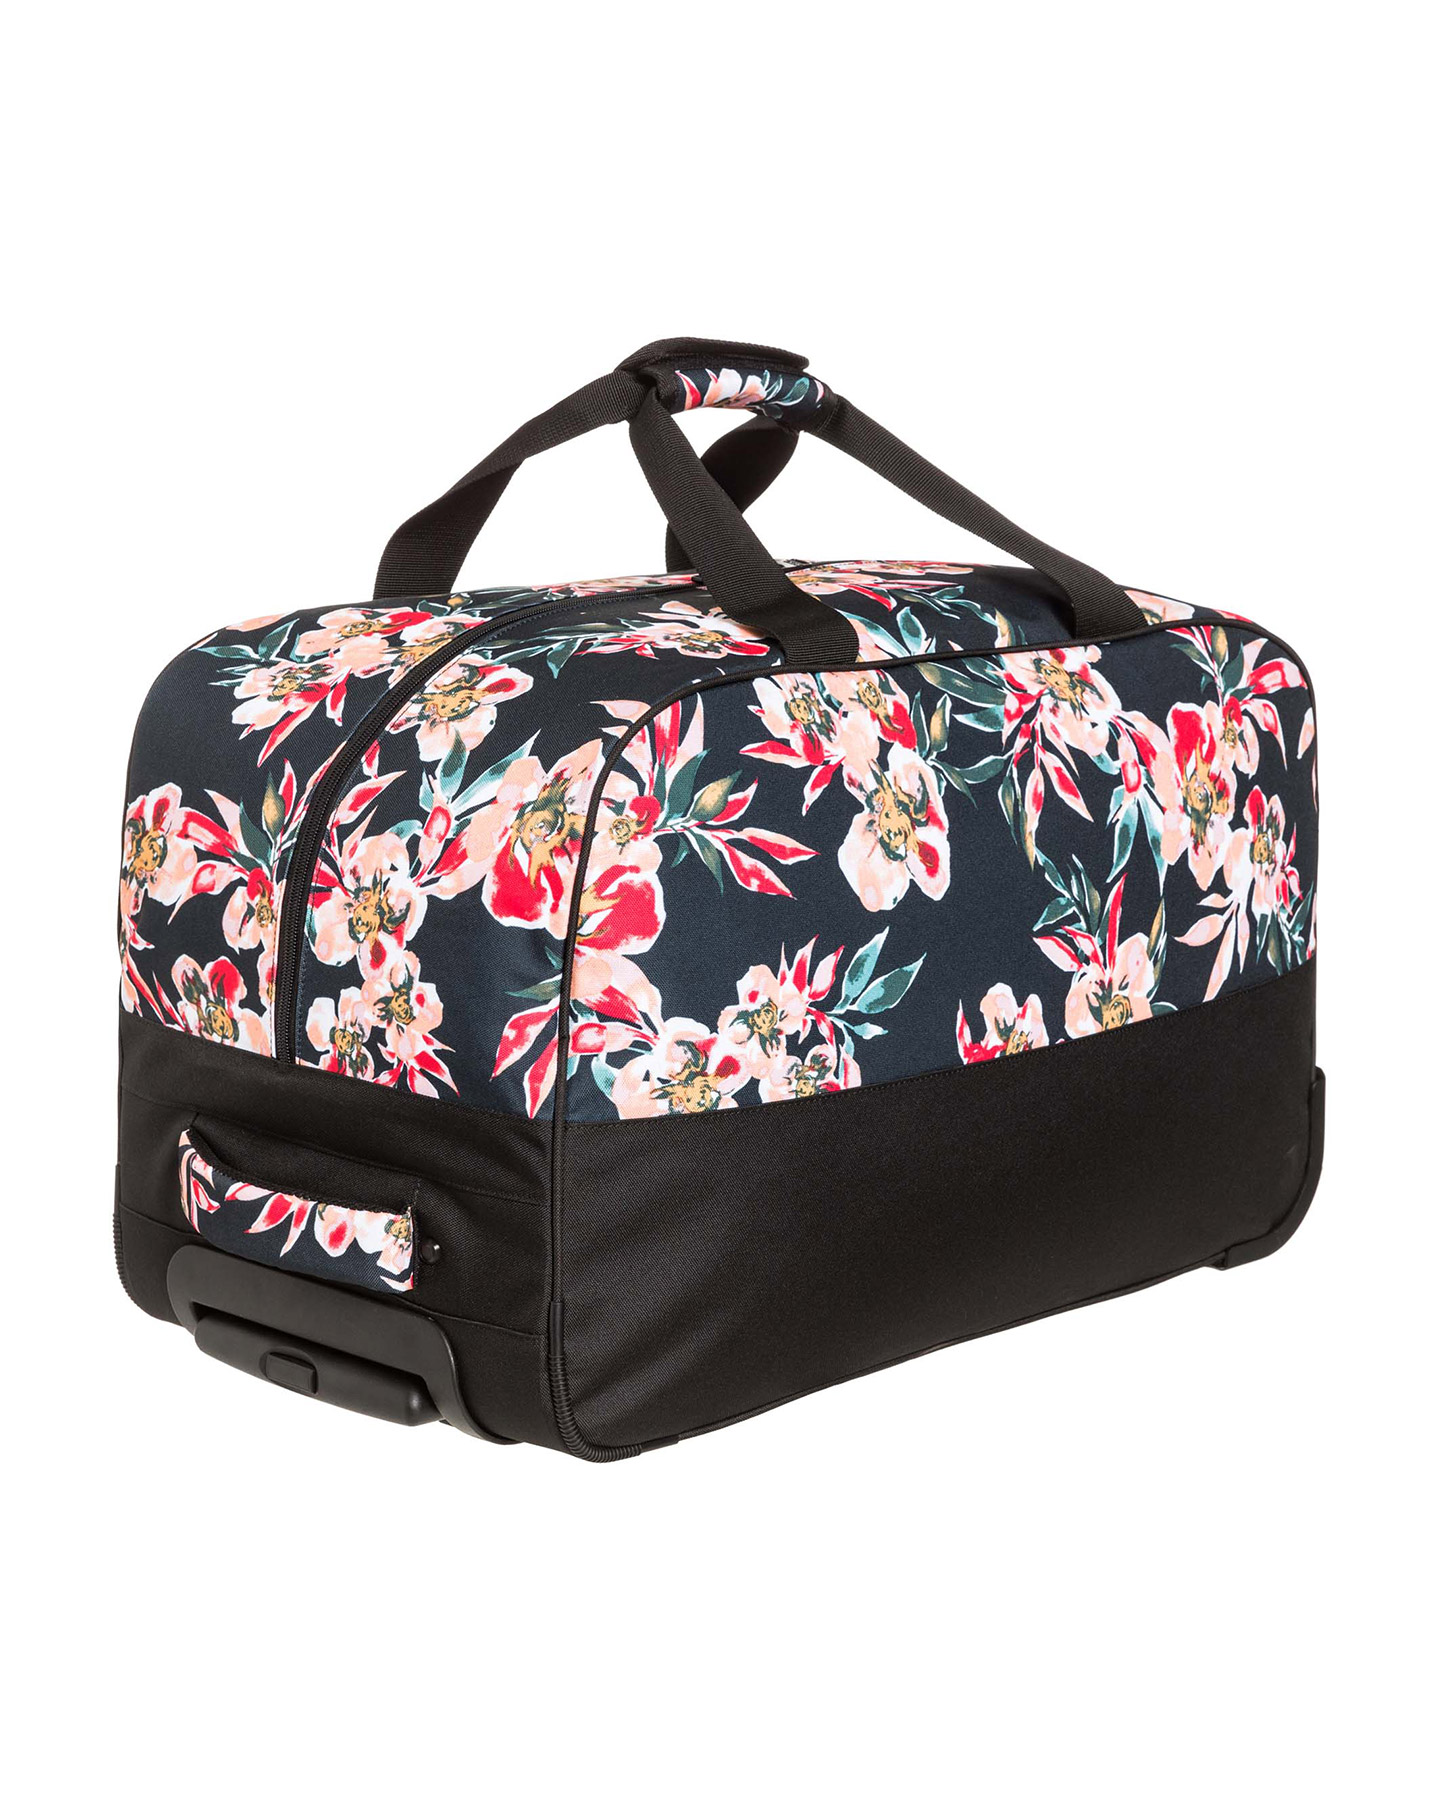 women's travel bag with wheels